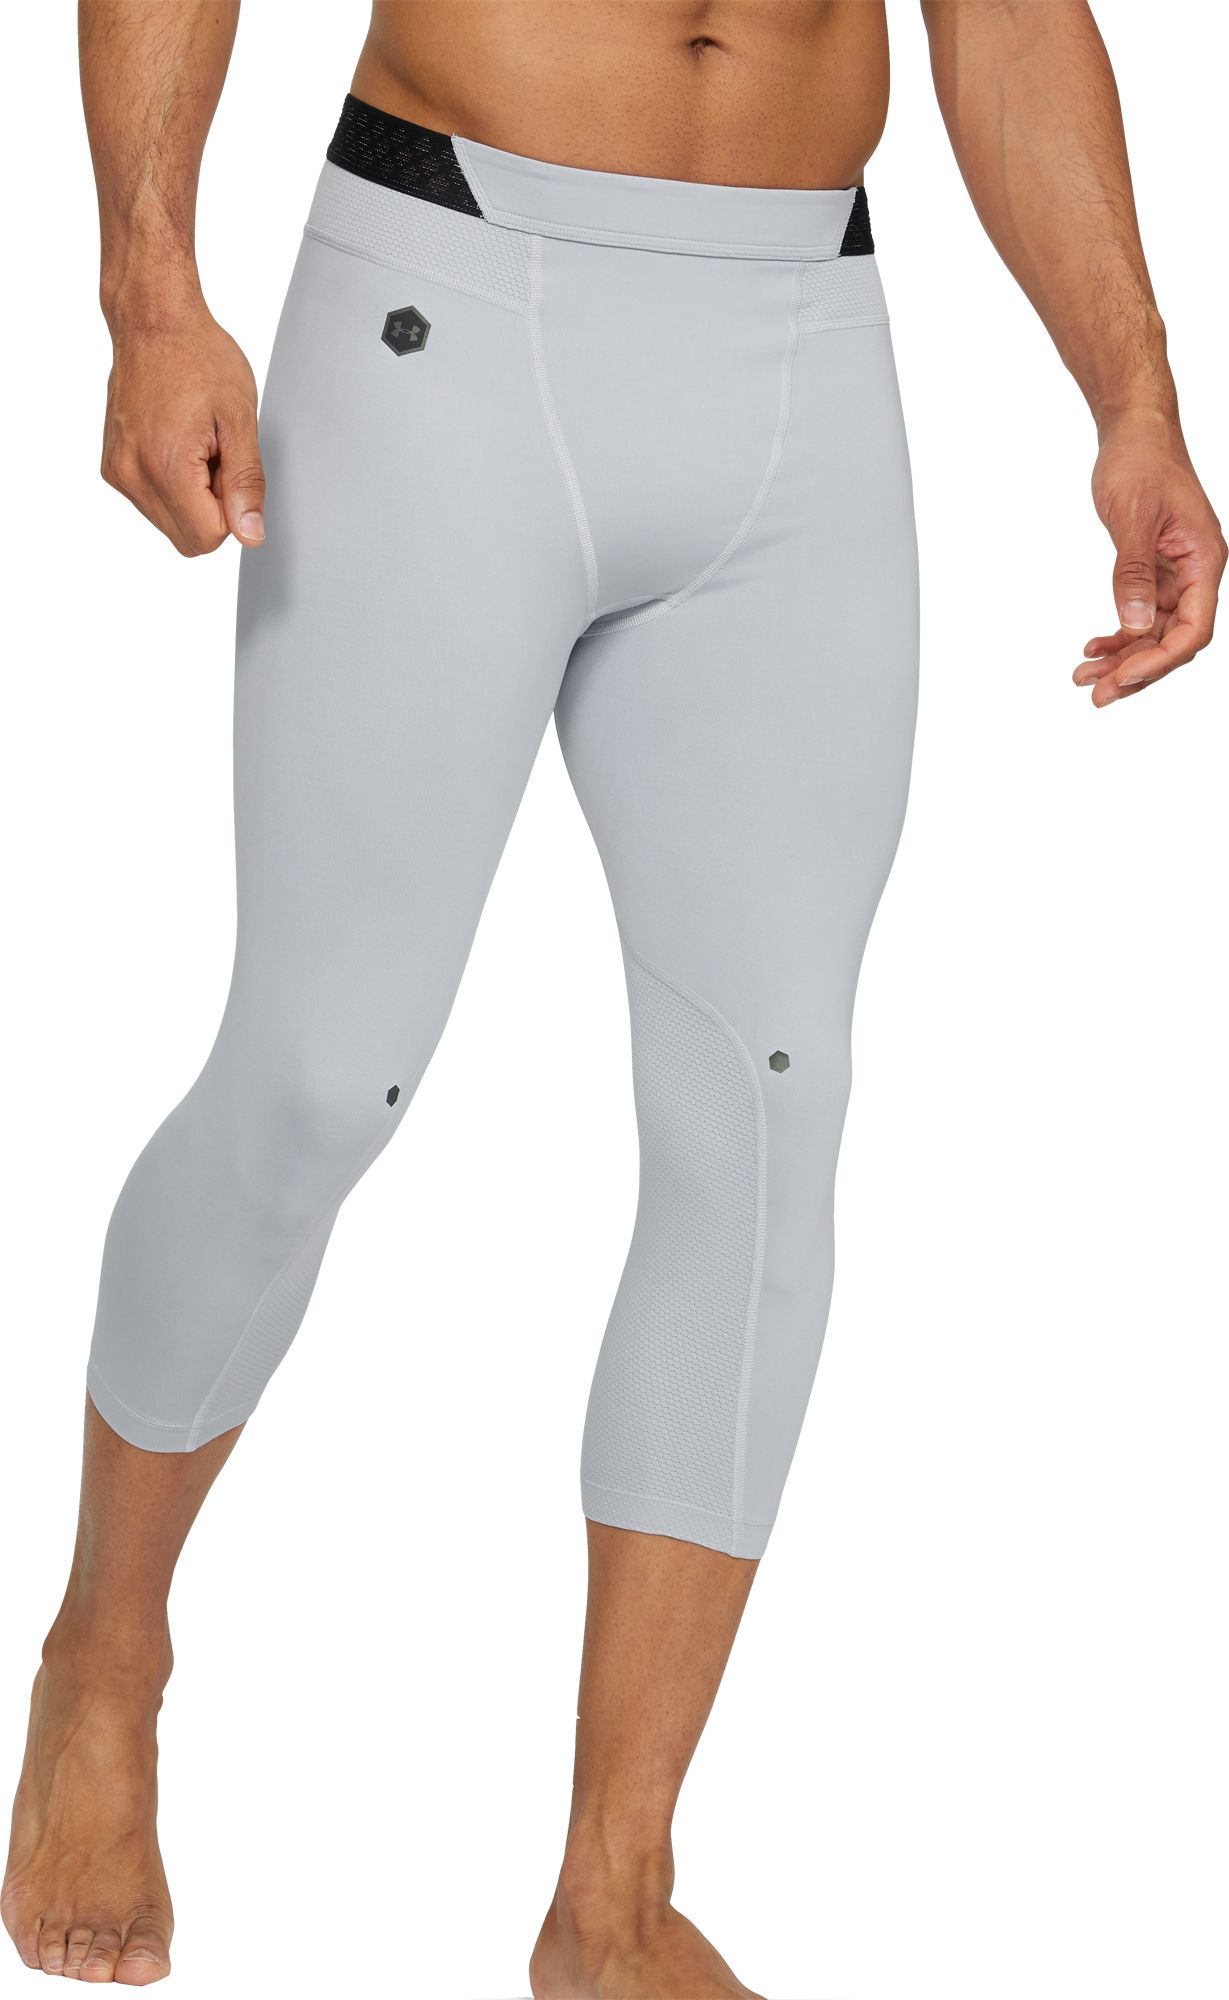 under armour men's compression tights